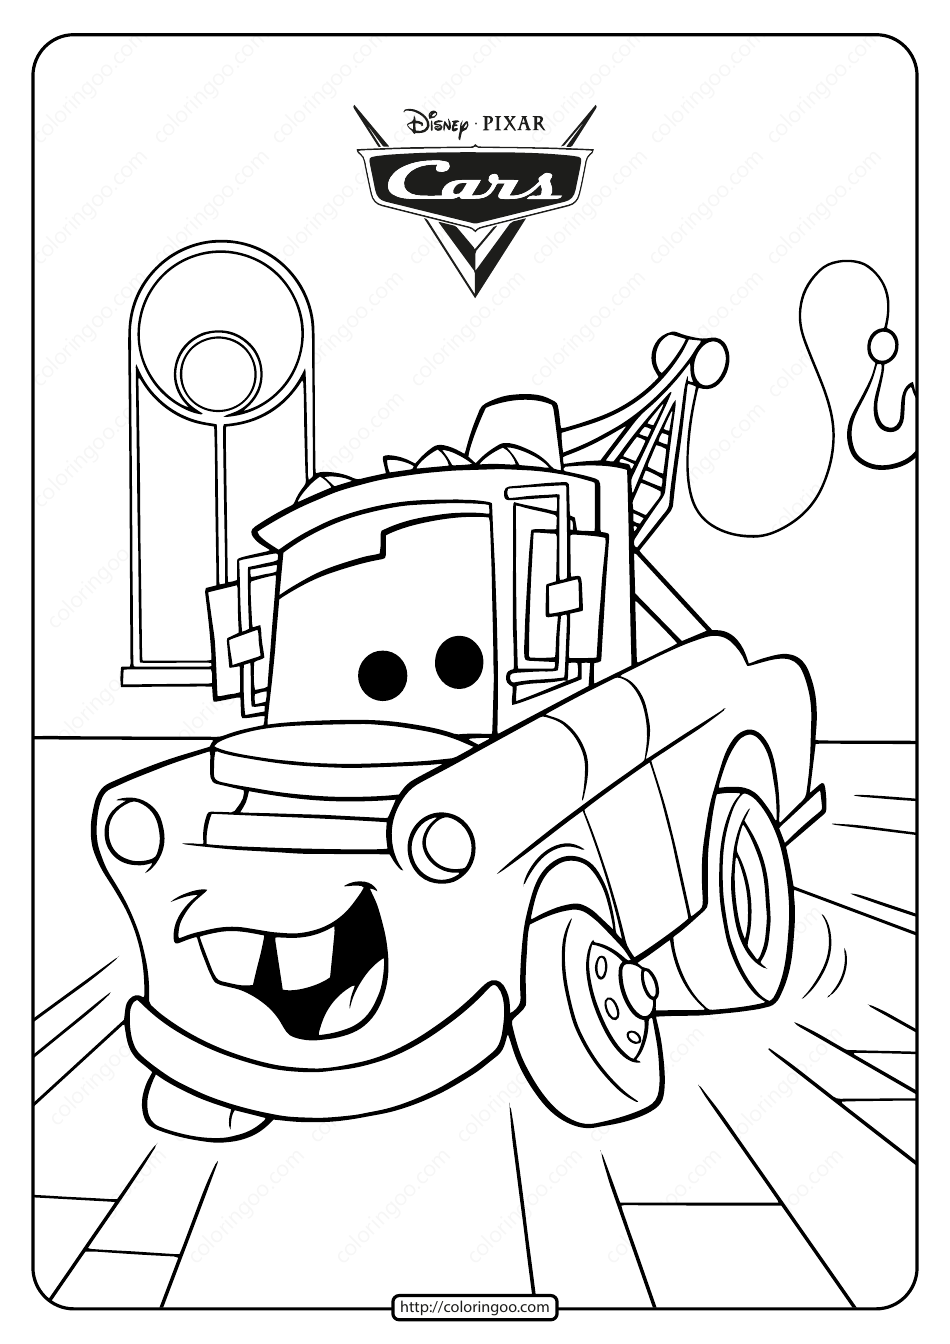 Mater Coloring Page from Disney Cars